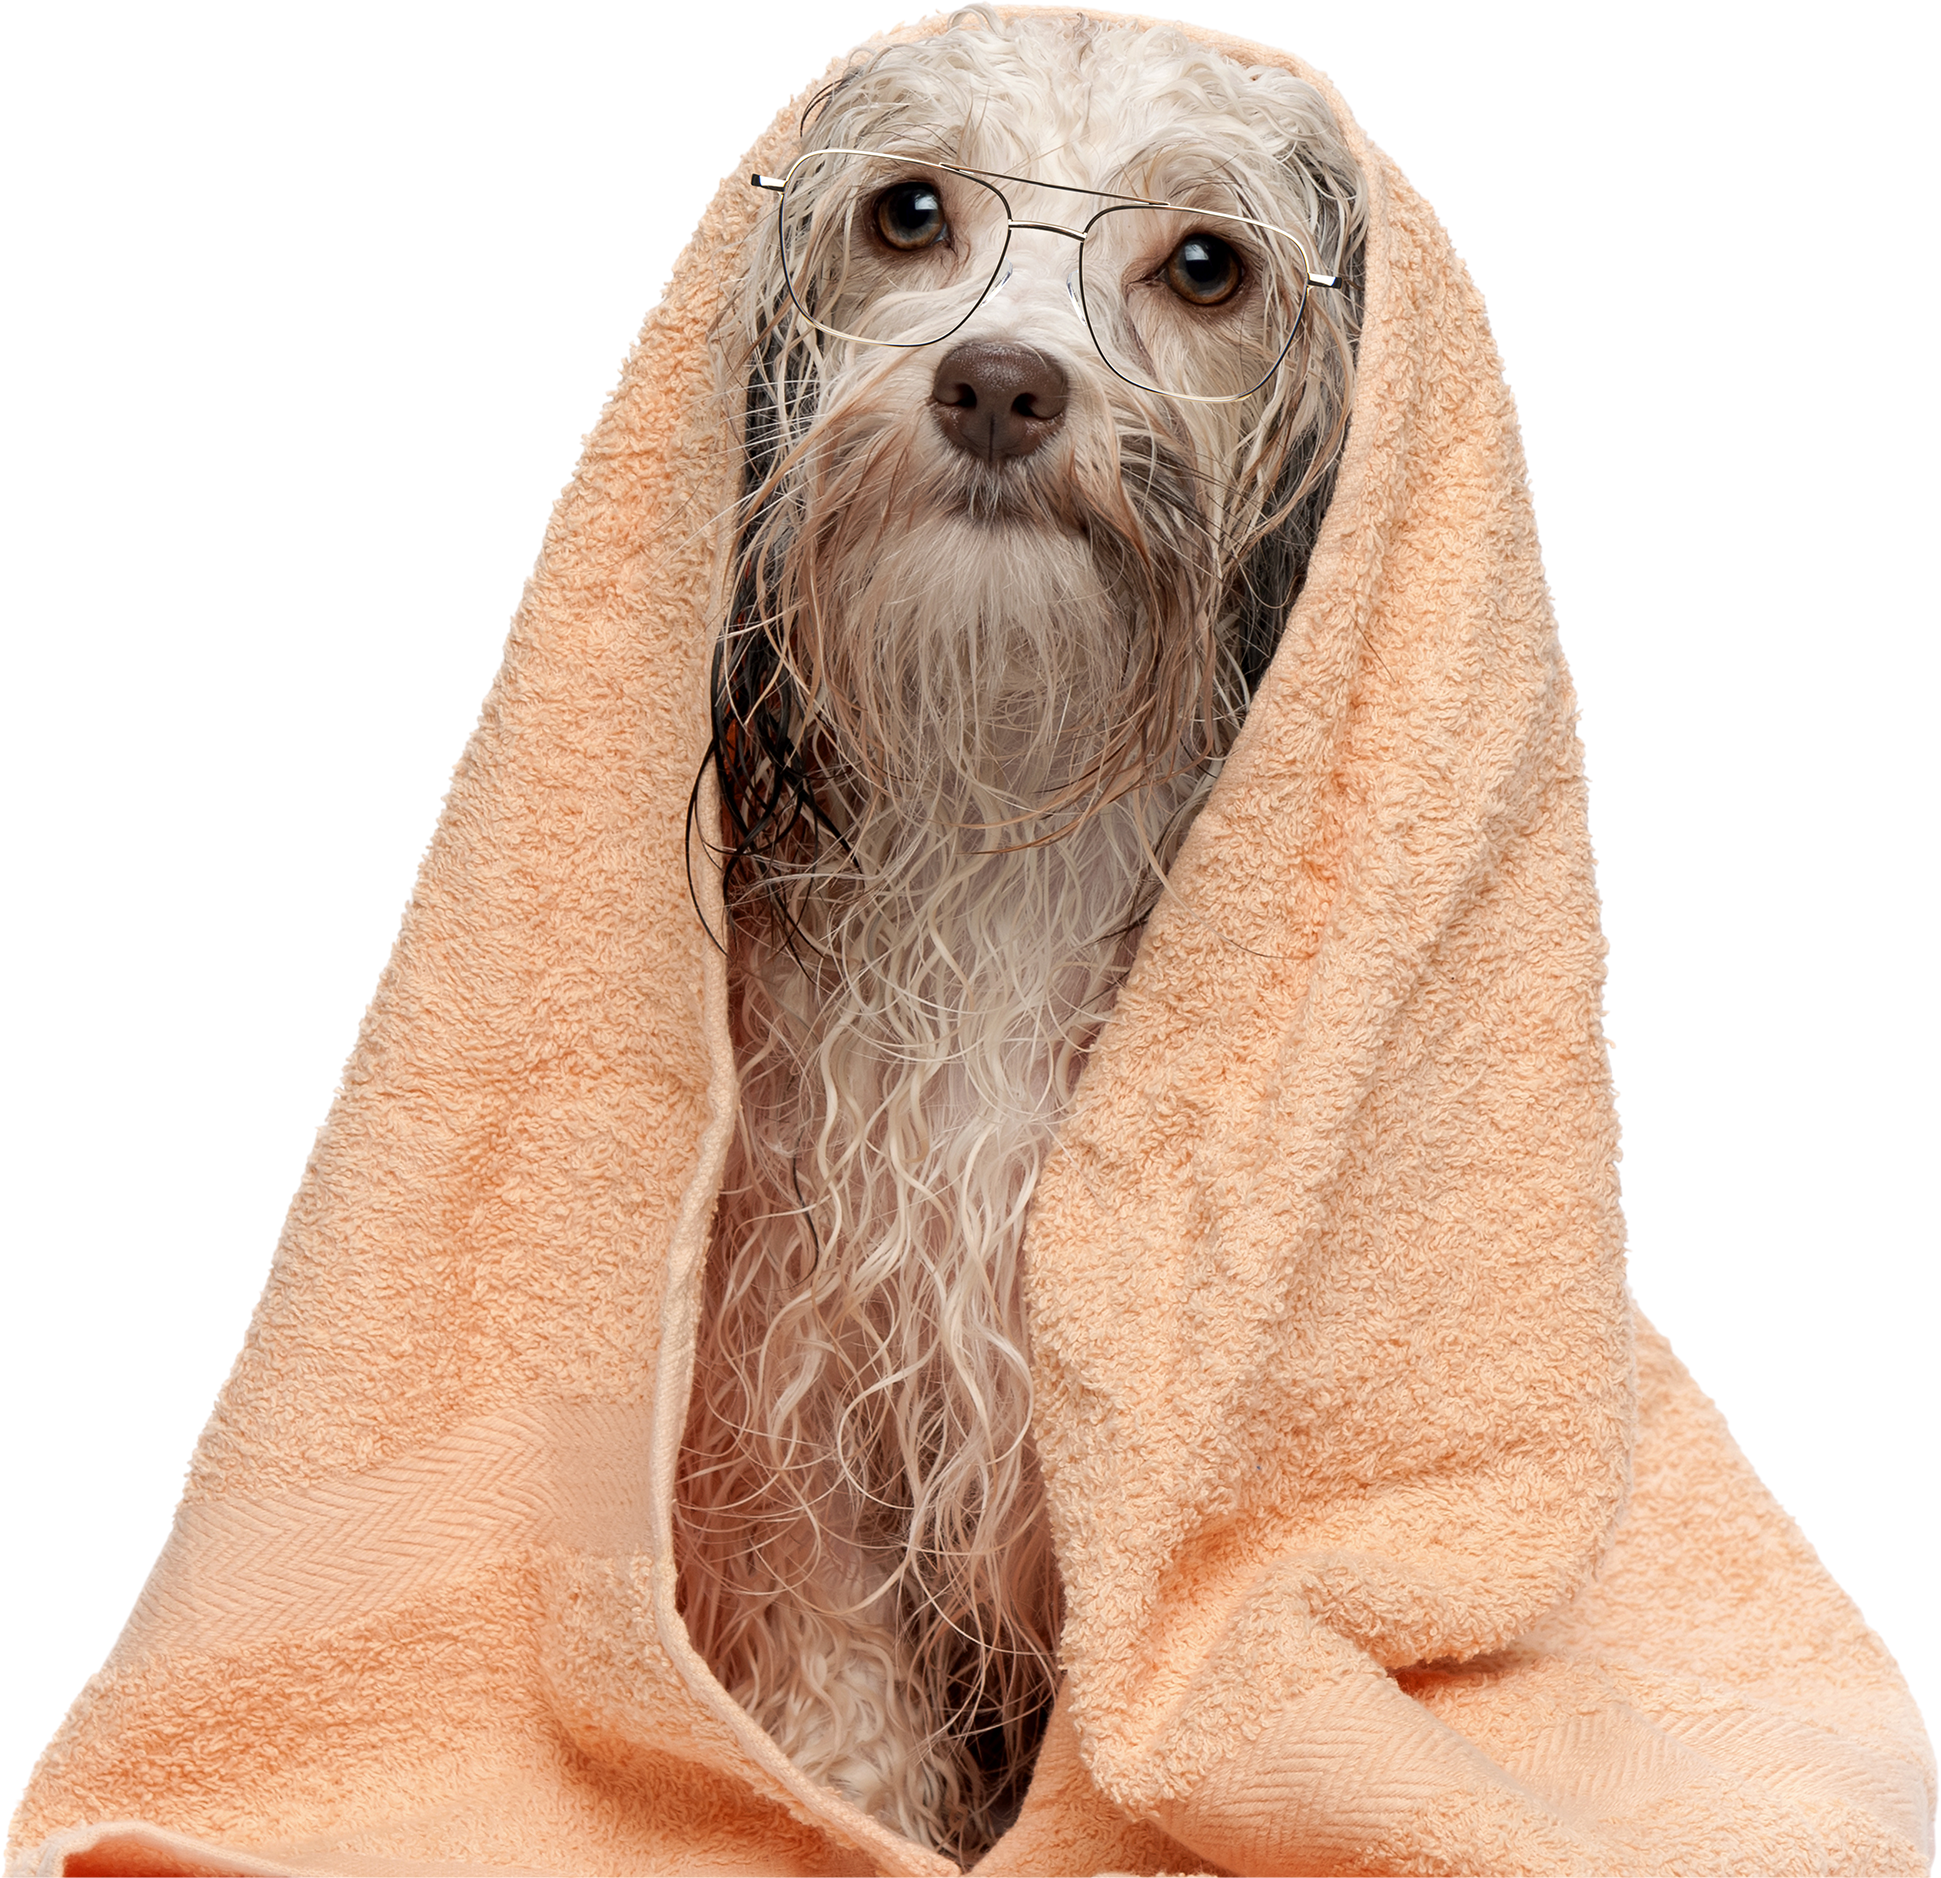 Wet dog wrapped in a towel